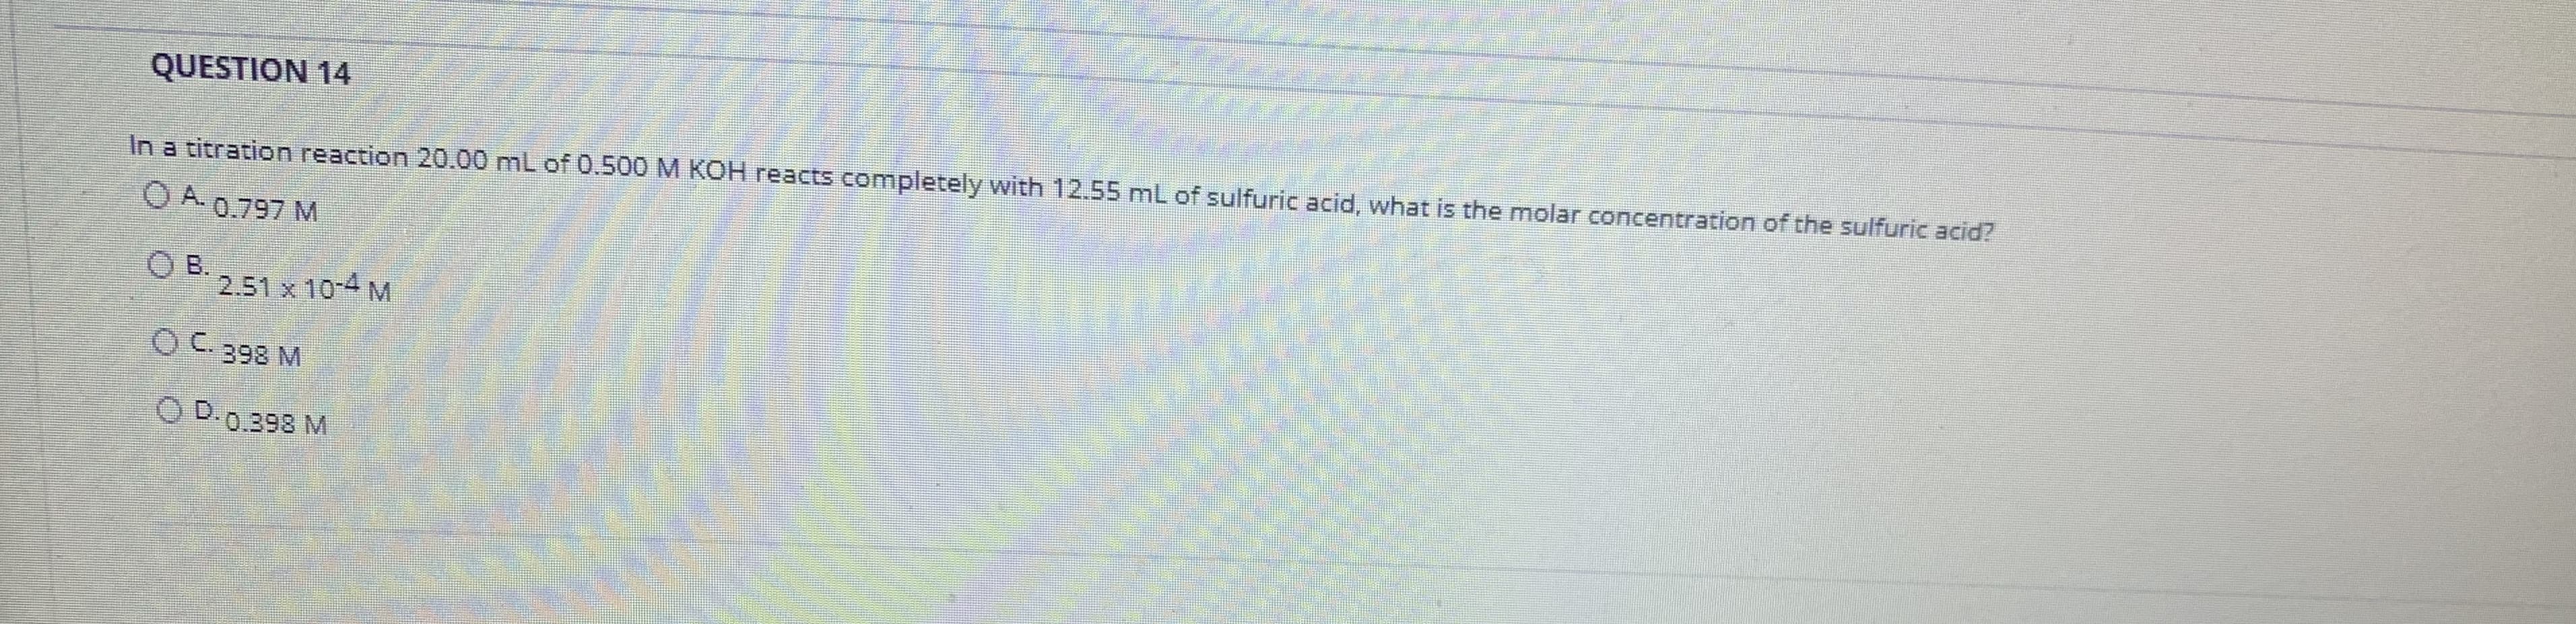 In a titration reaction 20.00 mL of 0.500 M KOH reacts completely with 12.55 mL of sulfuric acid, what is the molar concentration of the sulfuric acid?
O A 0.797 M
